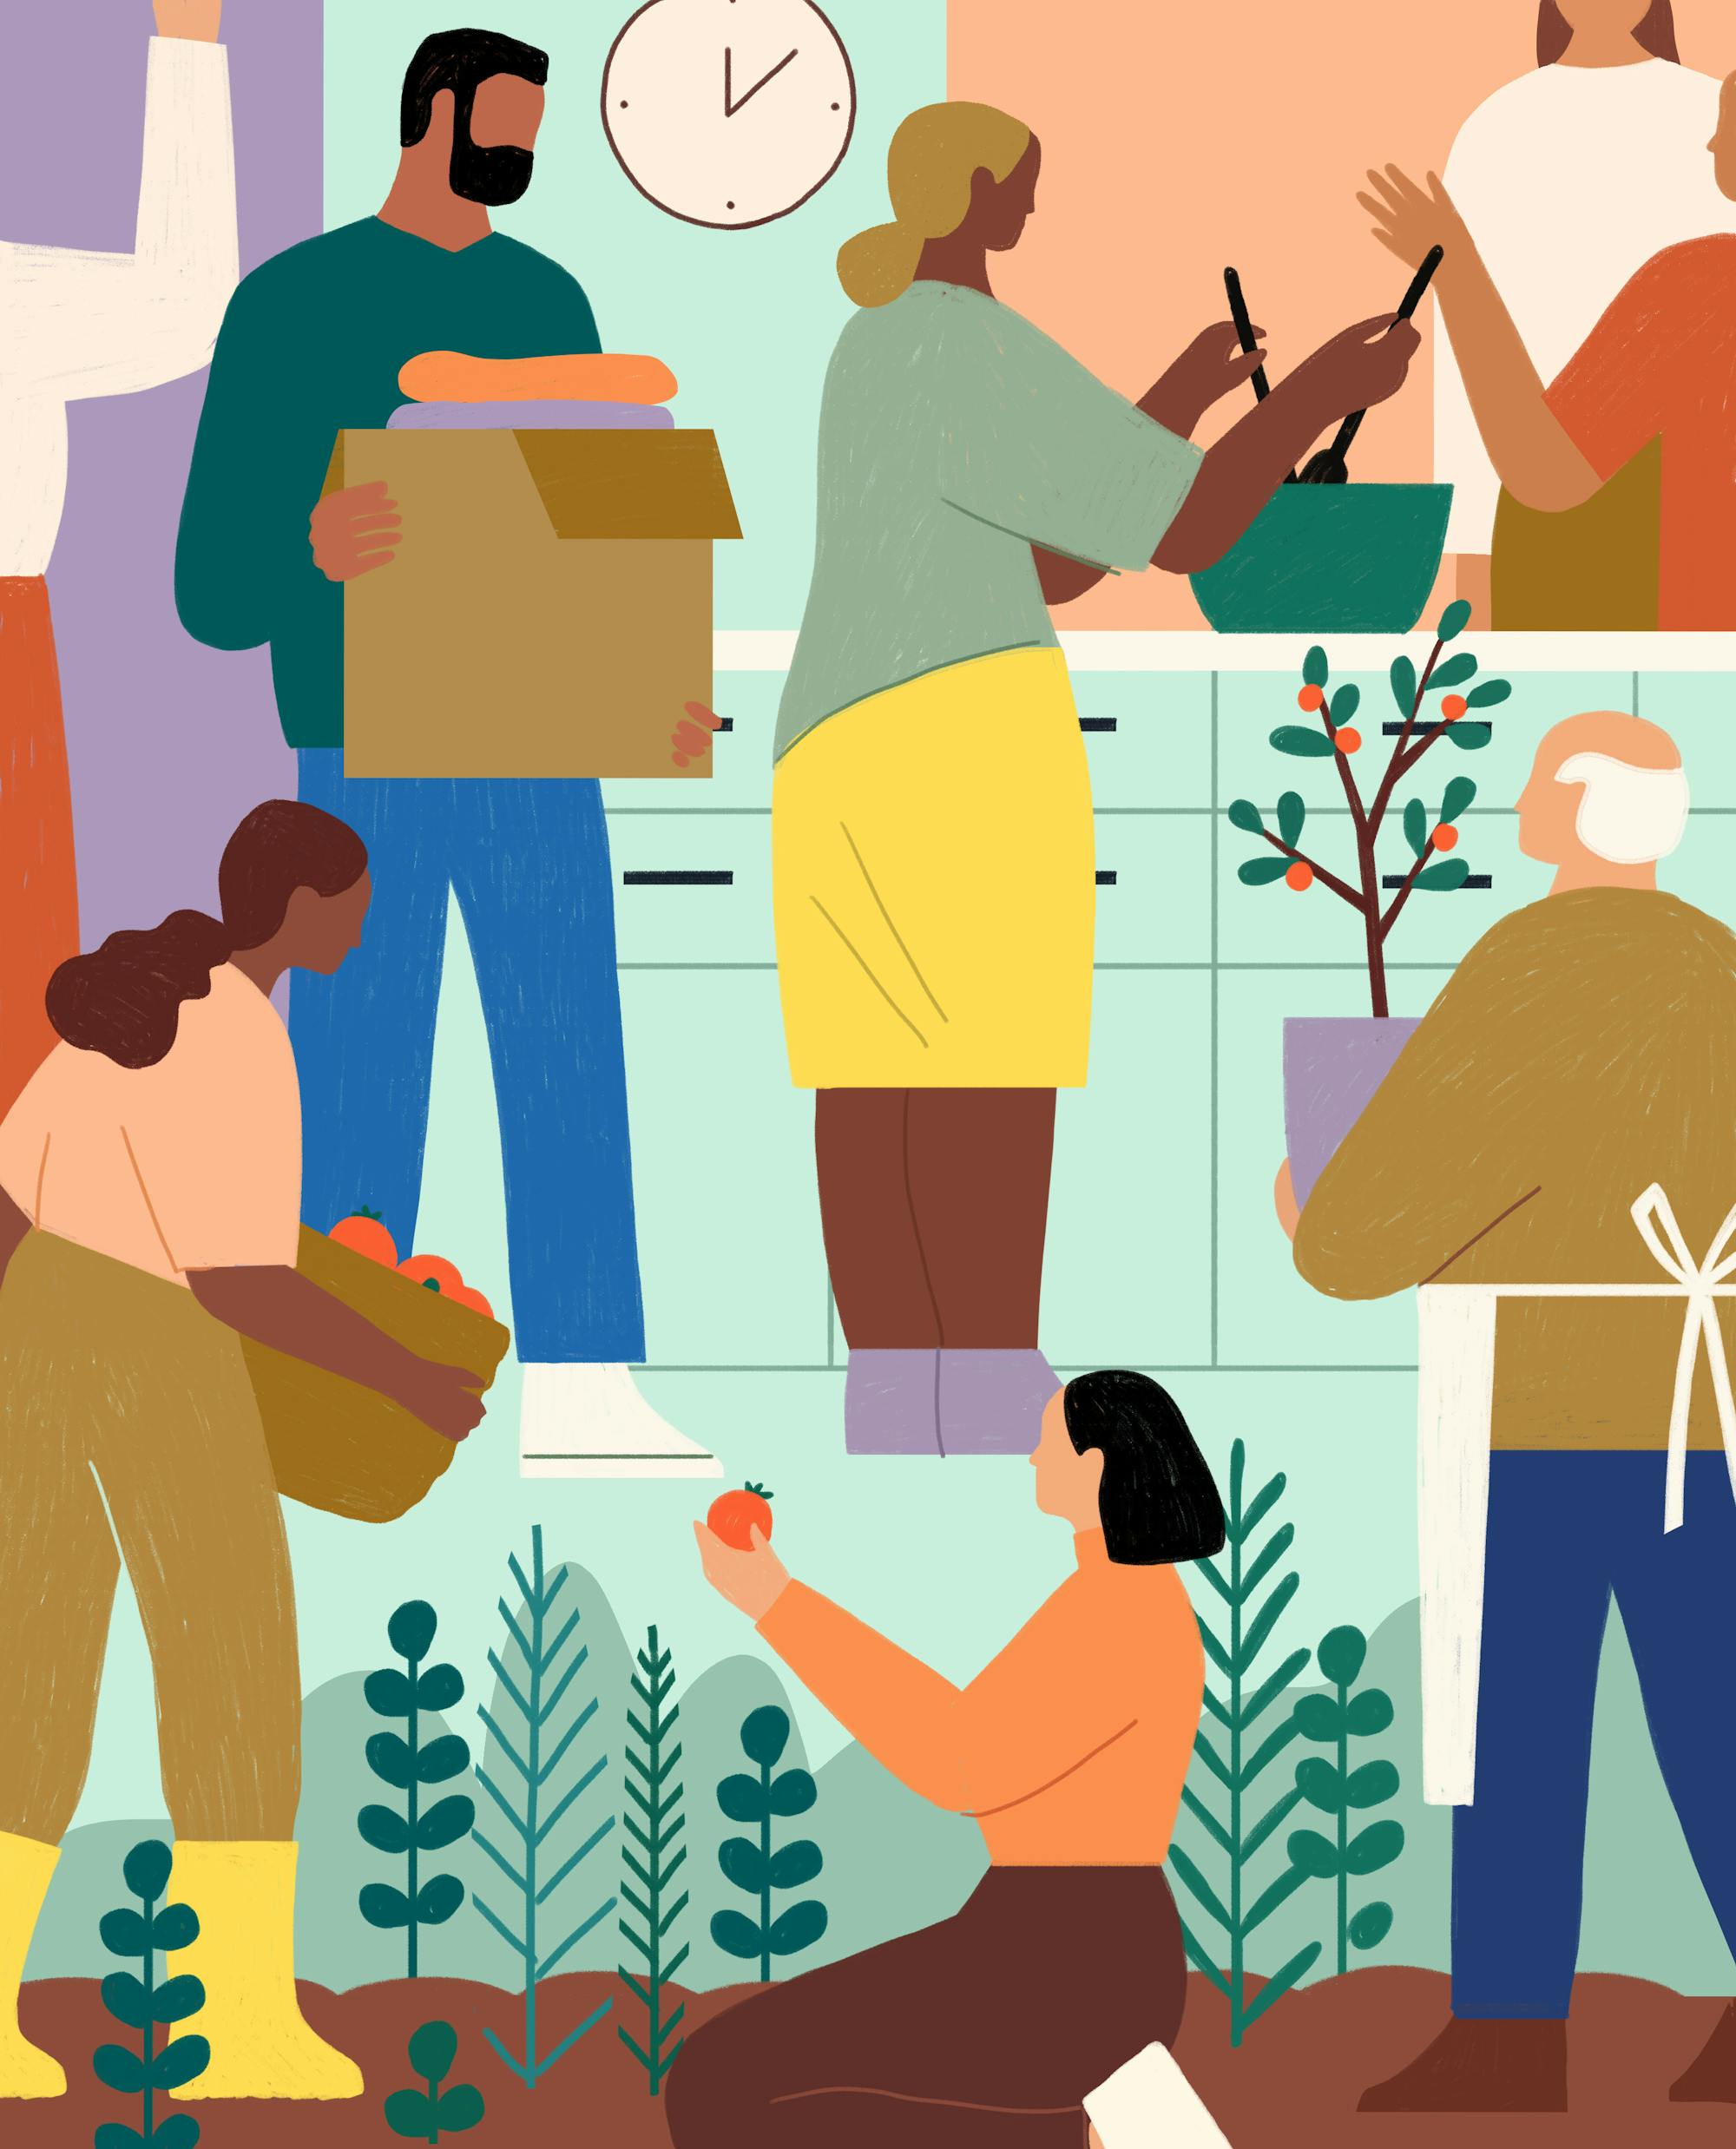 An illustration of a person surrounded by a collage of people engaged in various volunteer activities.